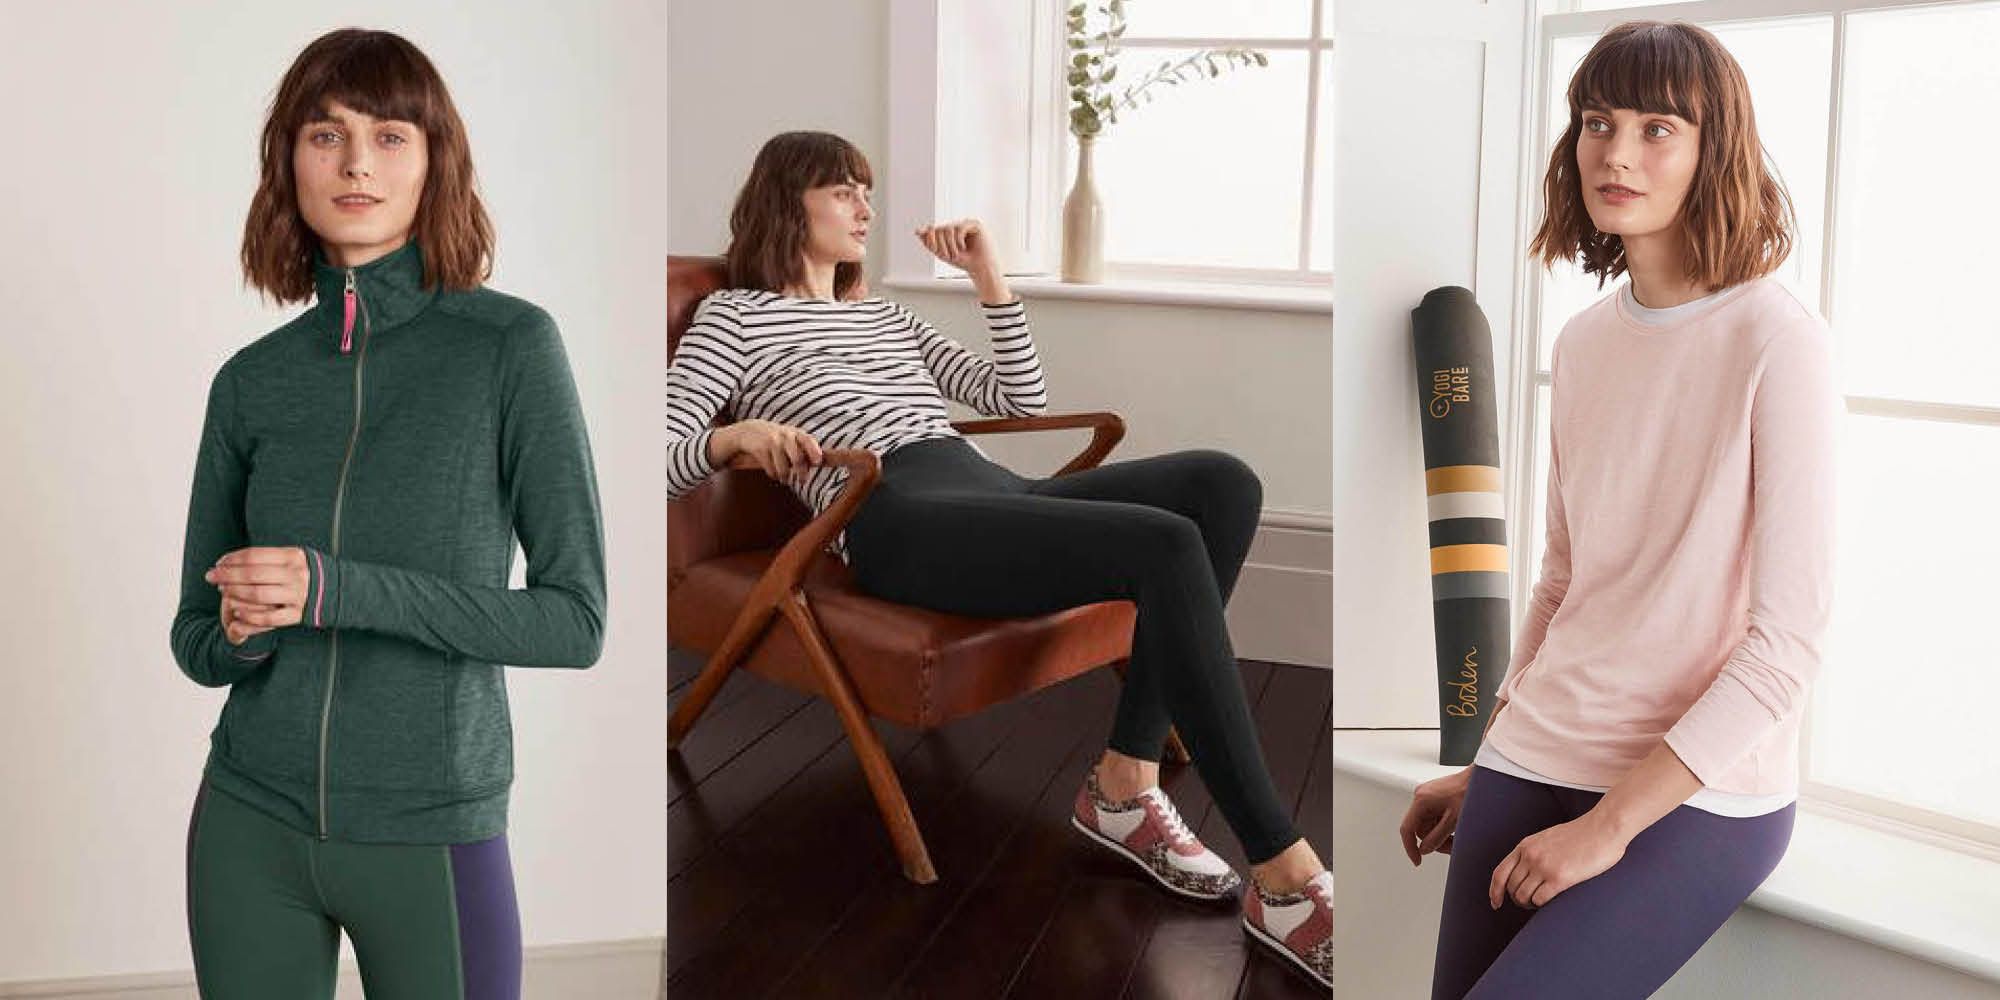 Boden has just launched its first-ever activewear range